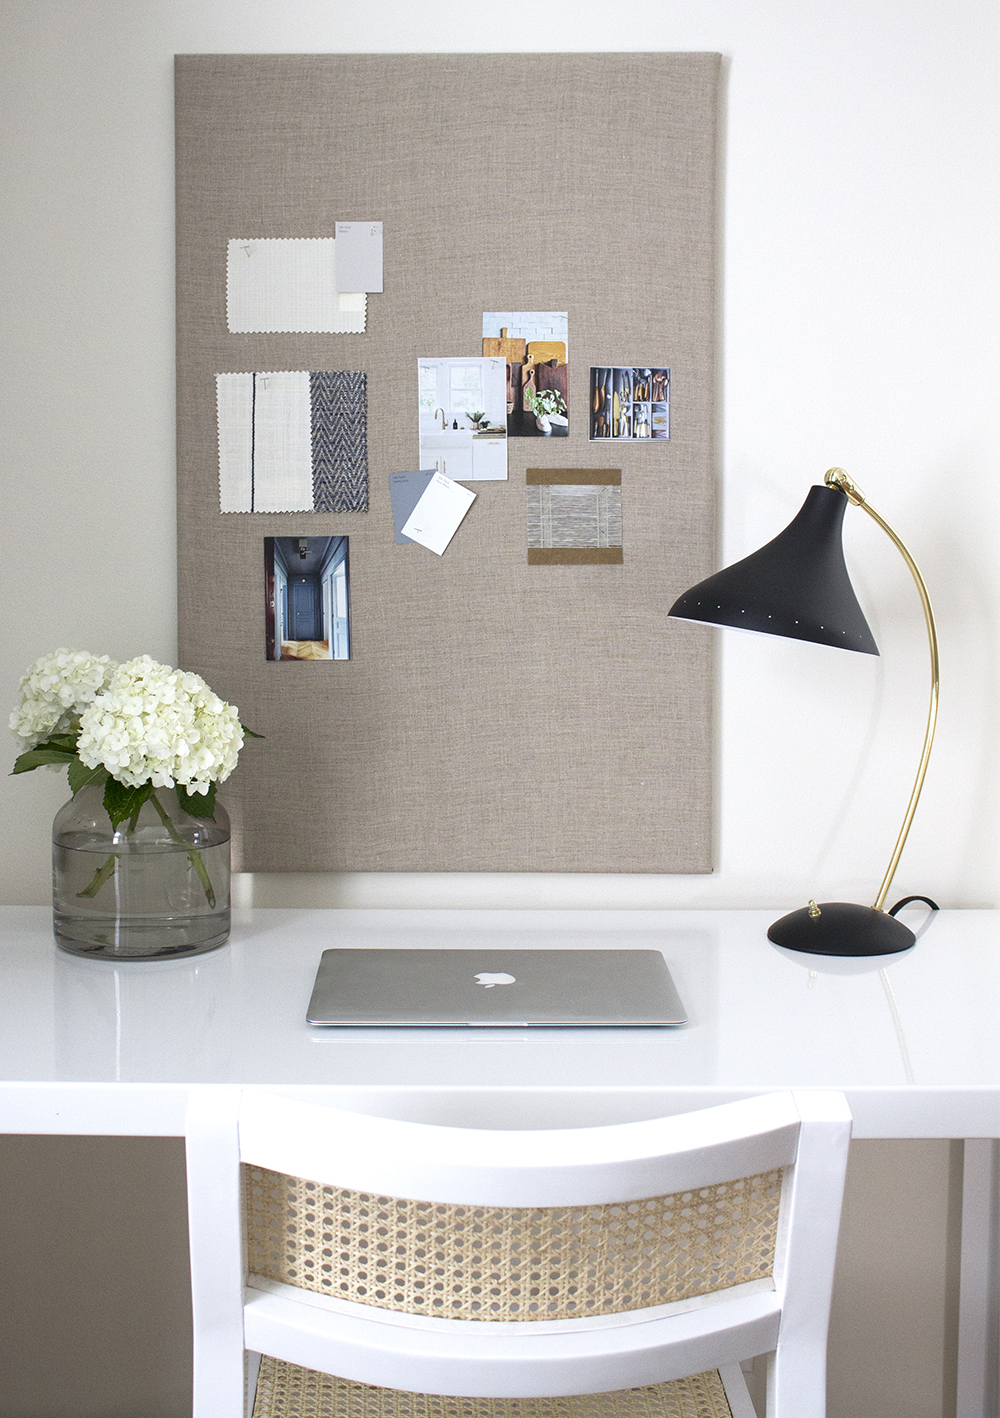 5 Tips for Working From Home + Home Office Furniture Roundup - roomfortuesday.com